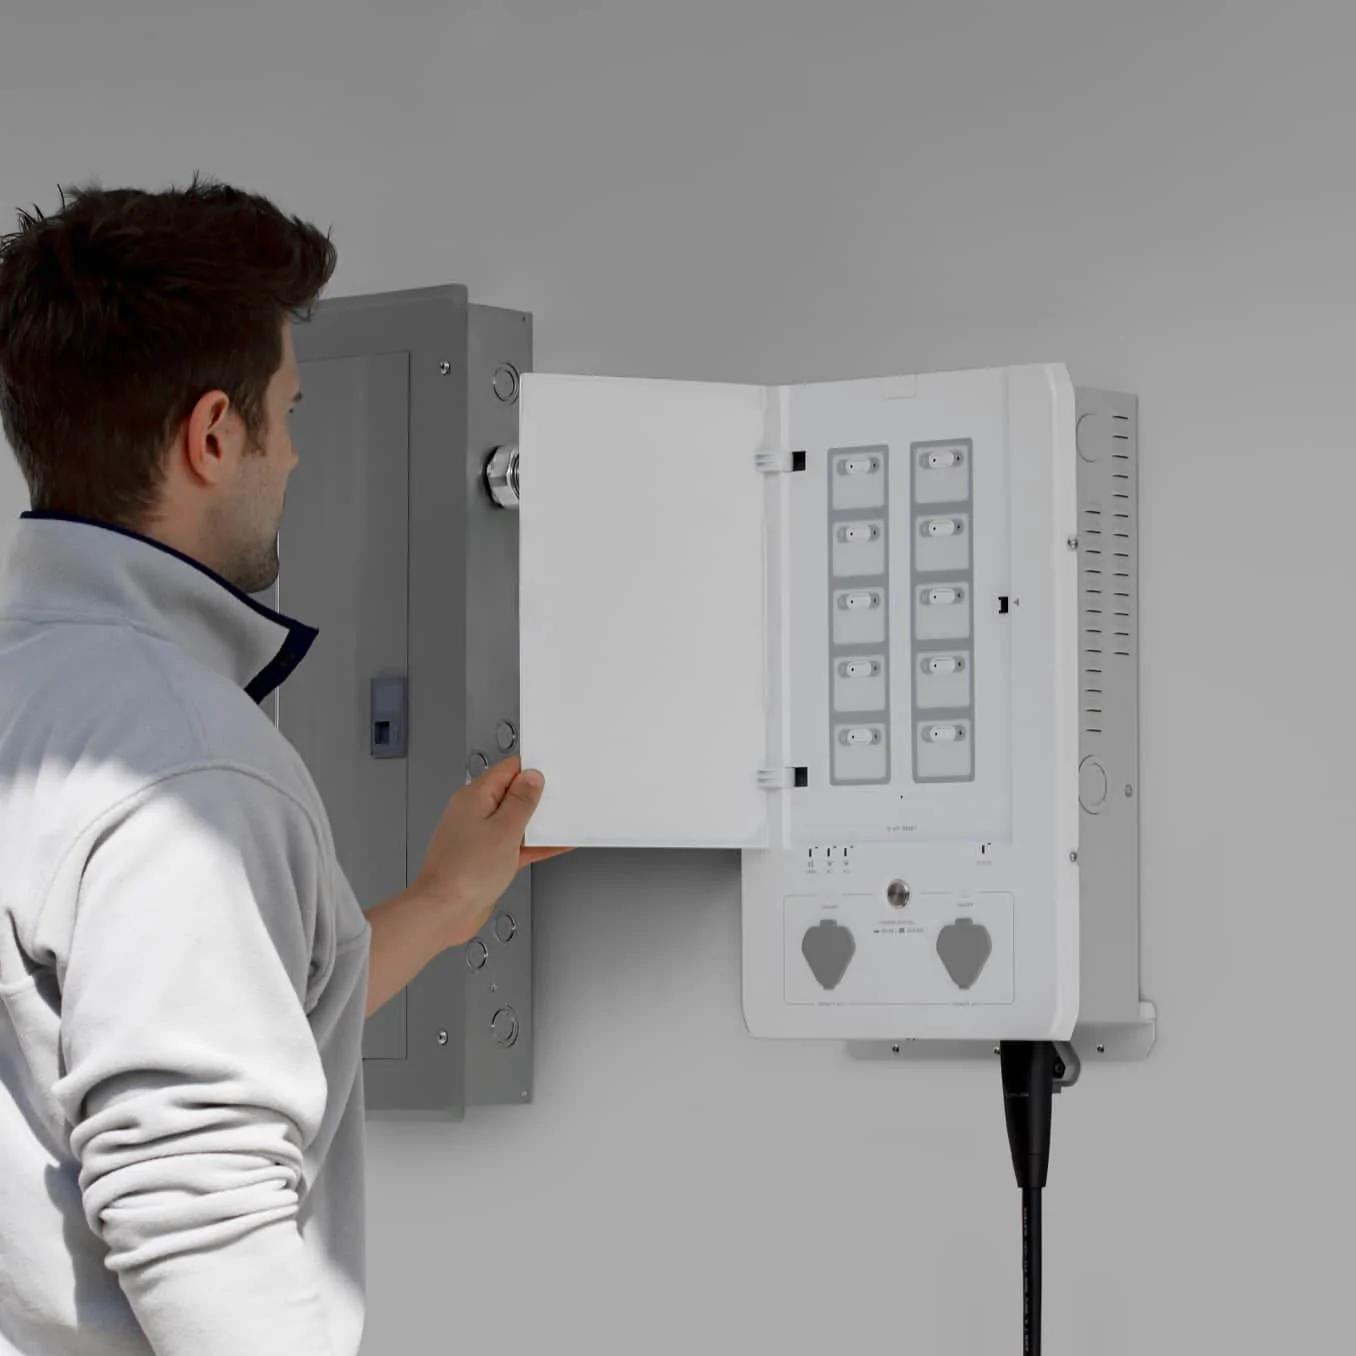 A man is installing an EcoFlow Smart Home Panel on a wall.